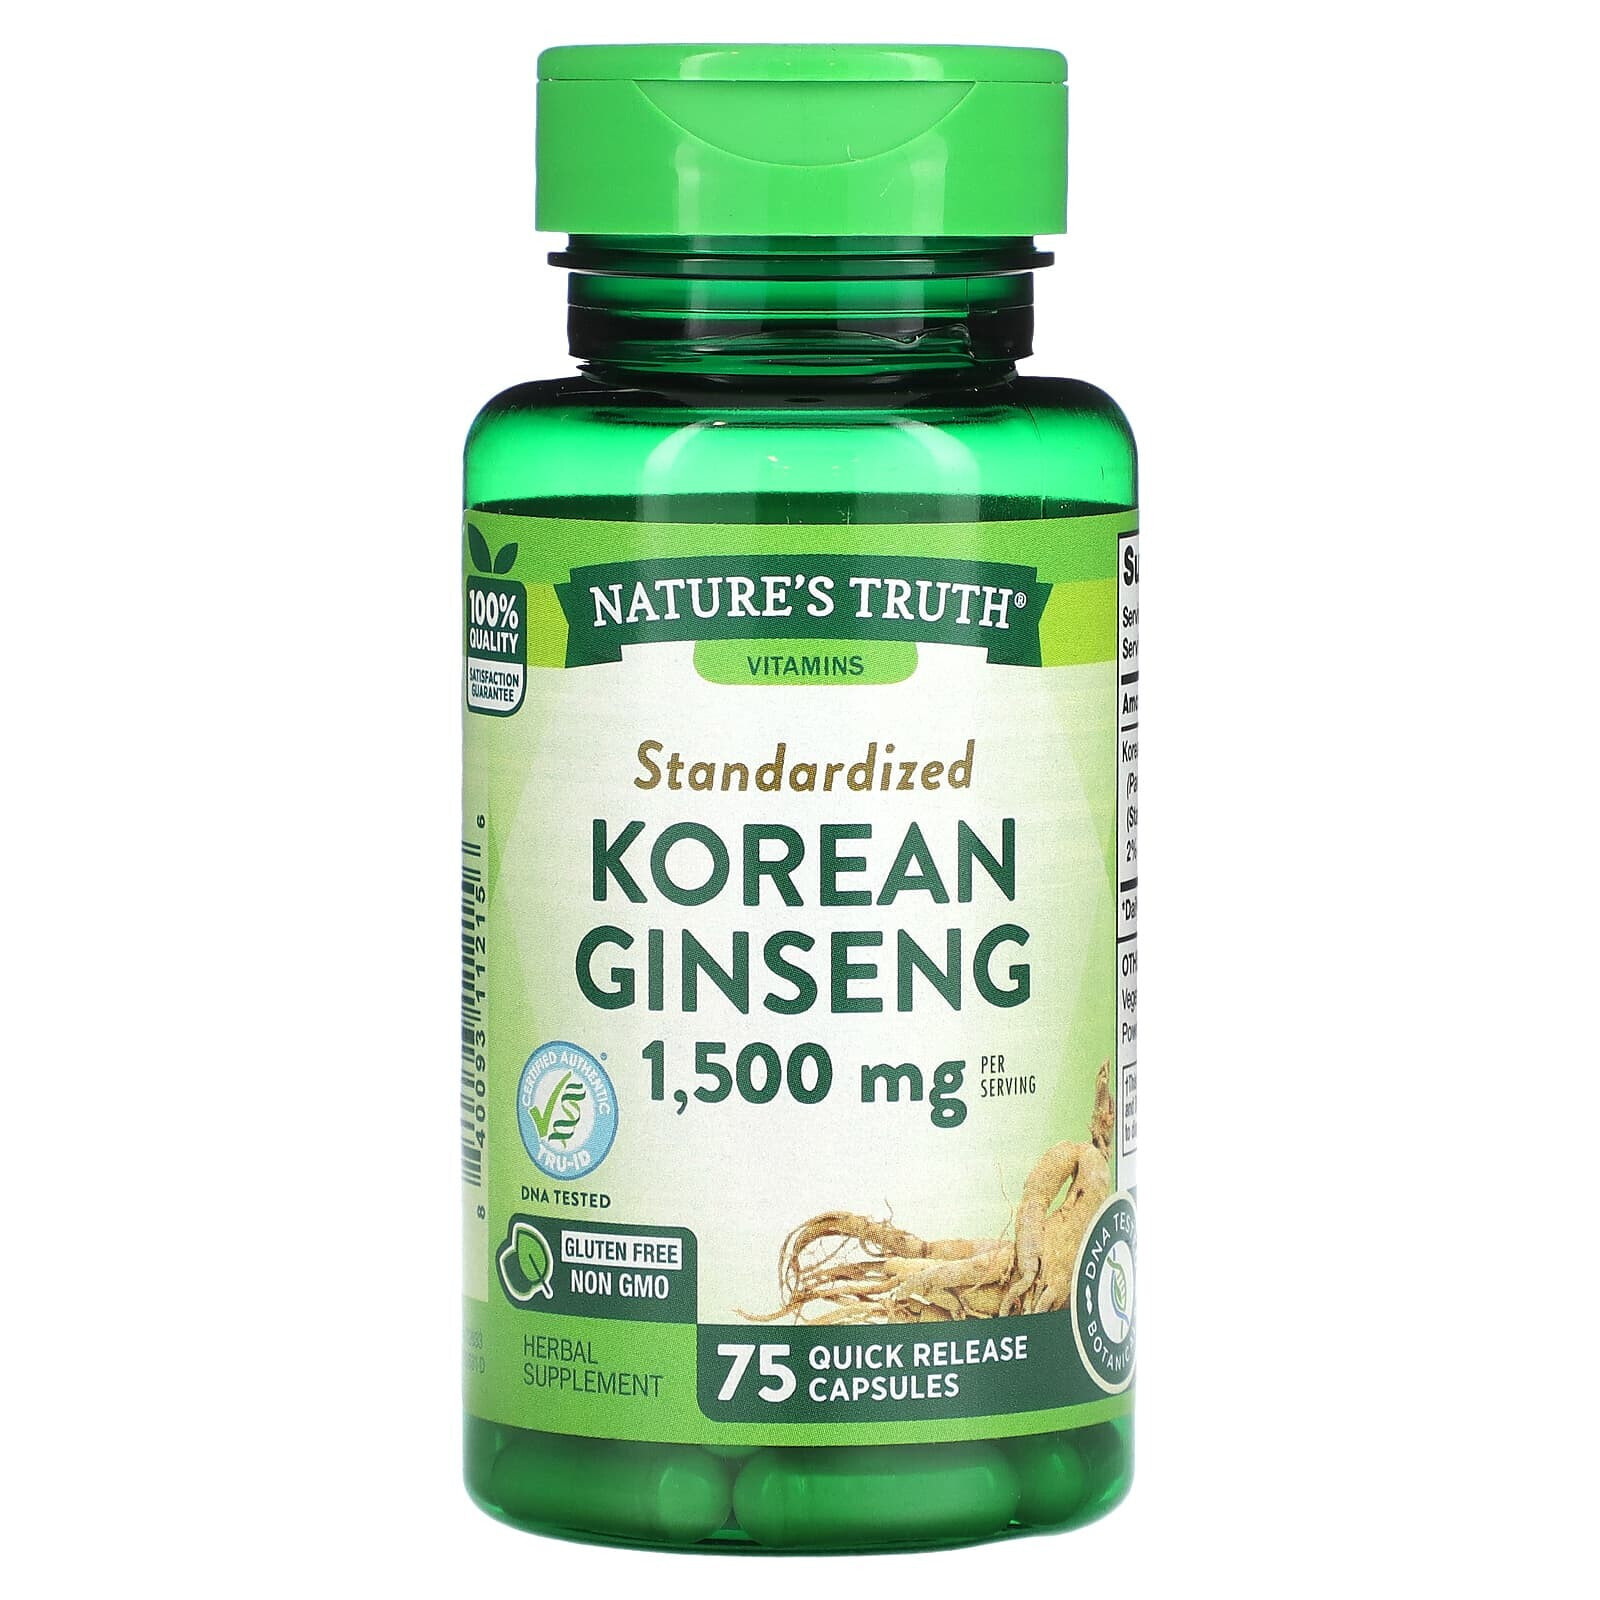 Nature's Truth, Standardized Korean Ginseng, 500 mg, 75 Quick Release Capsules